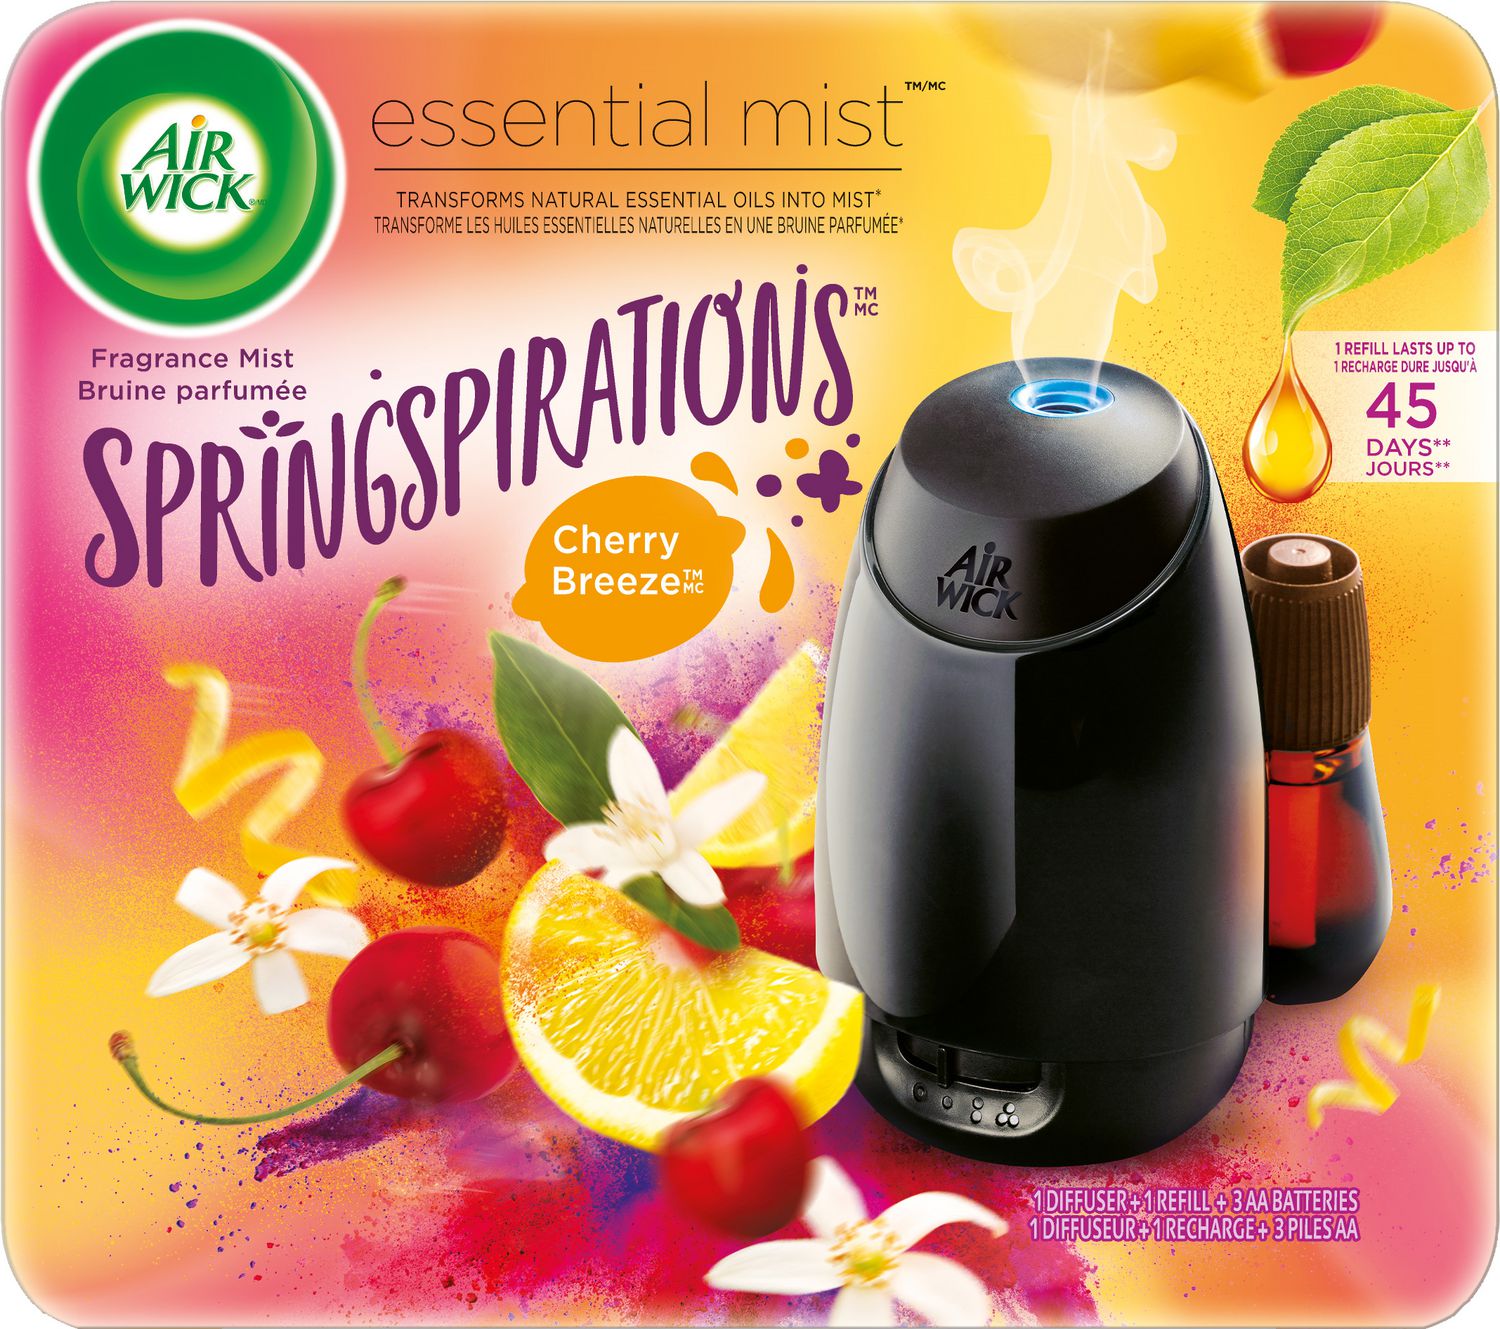 Air Wick Essential Mist Springspirations Fragrance Oil Diffuser, Cherry